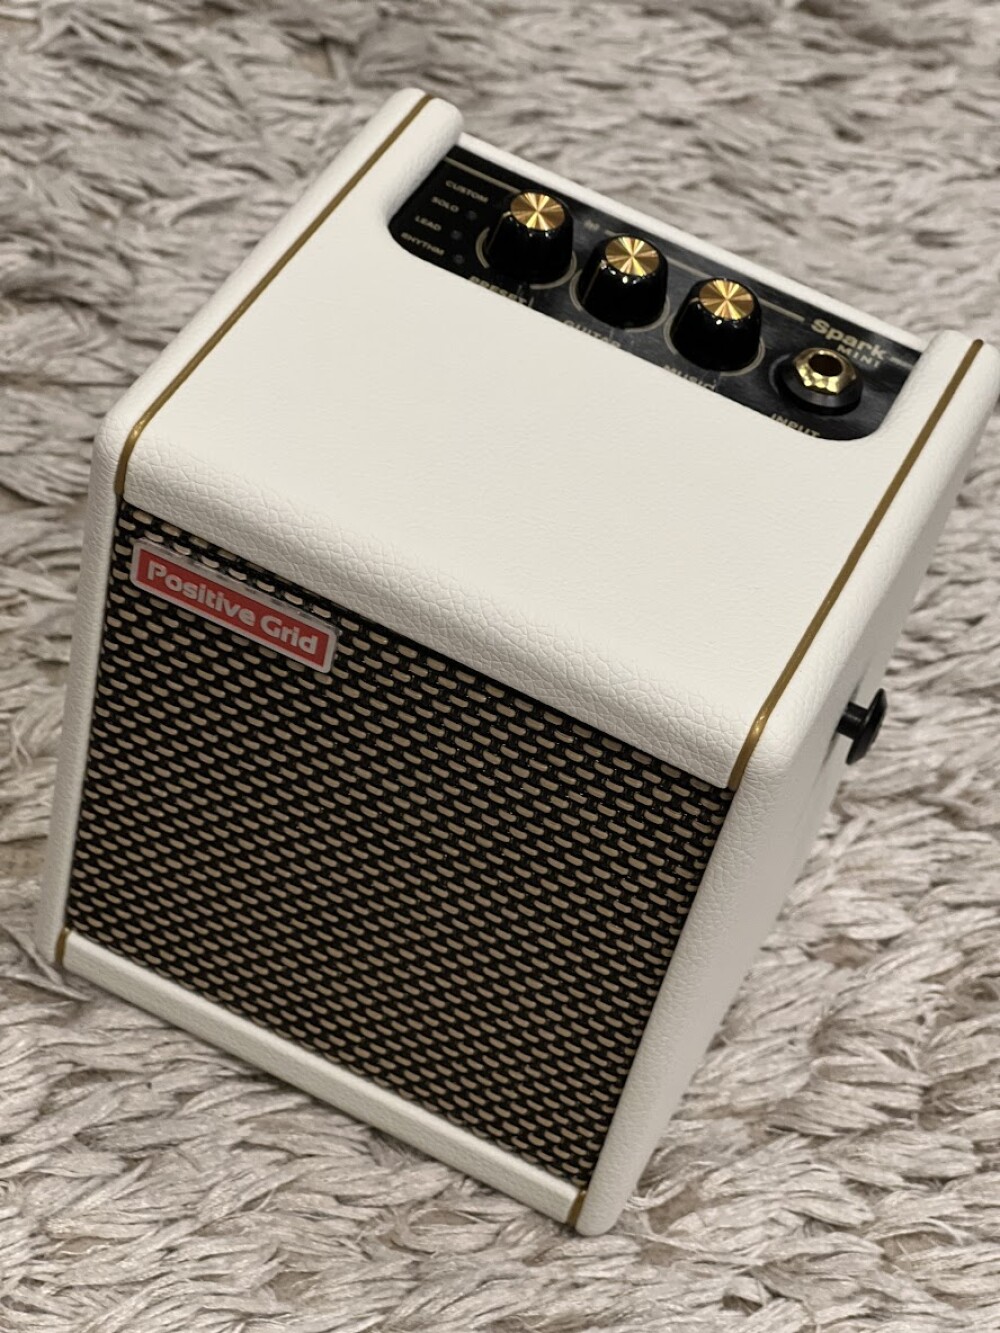 Positive Grid takes guitar amp modeling portable with the Spark Go